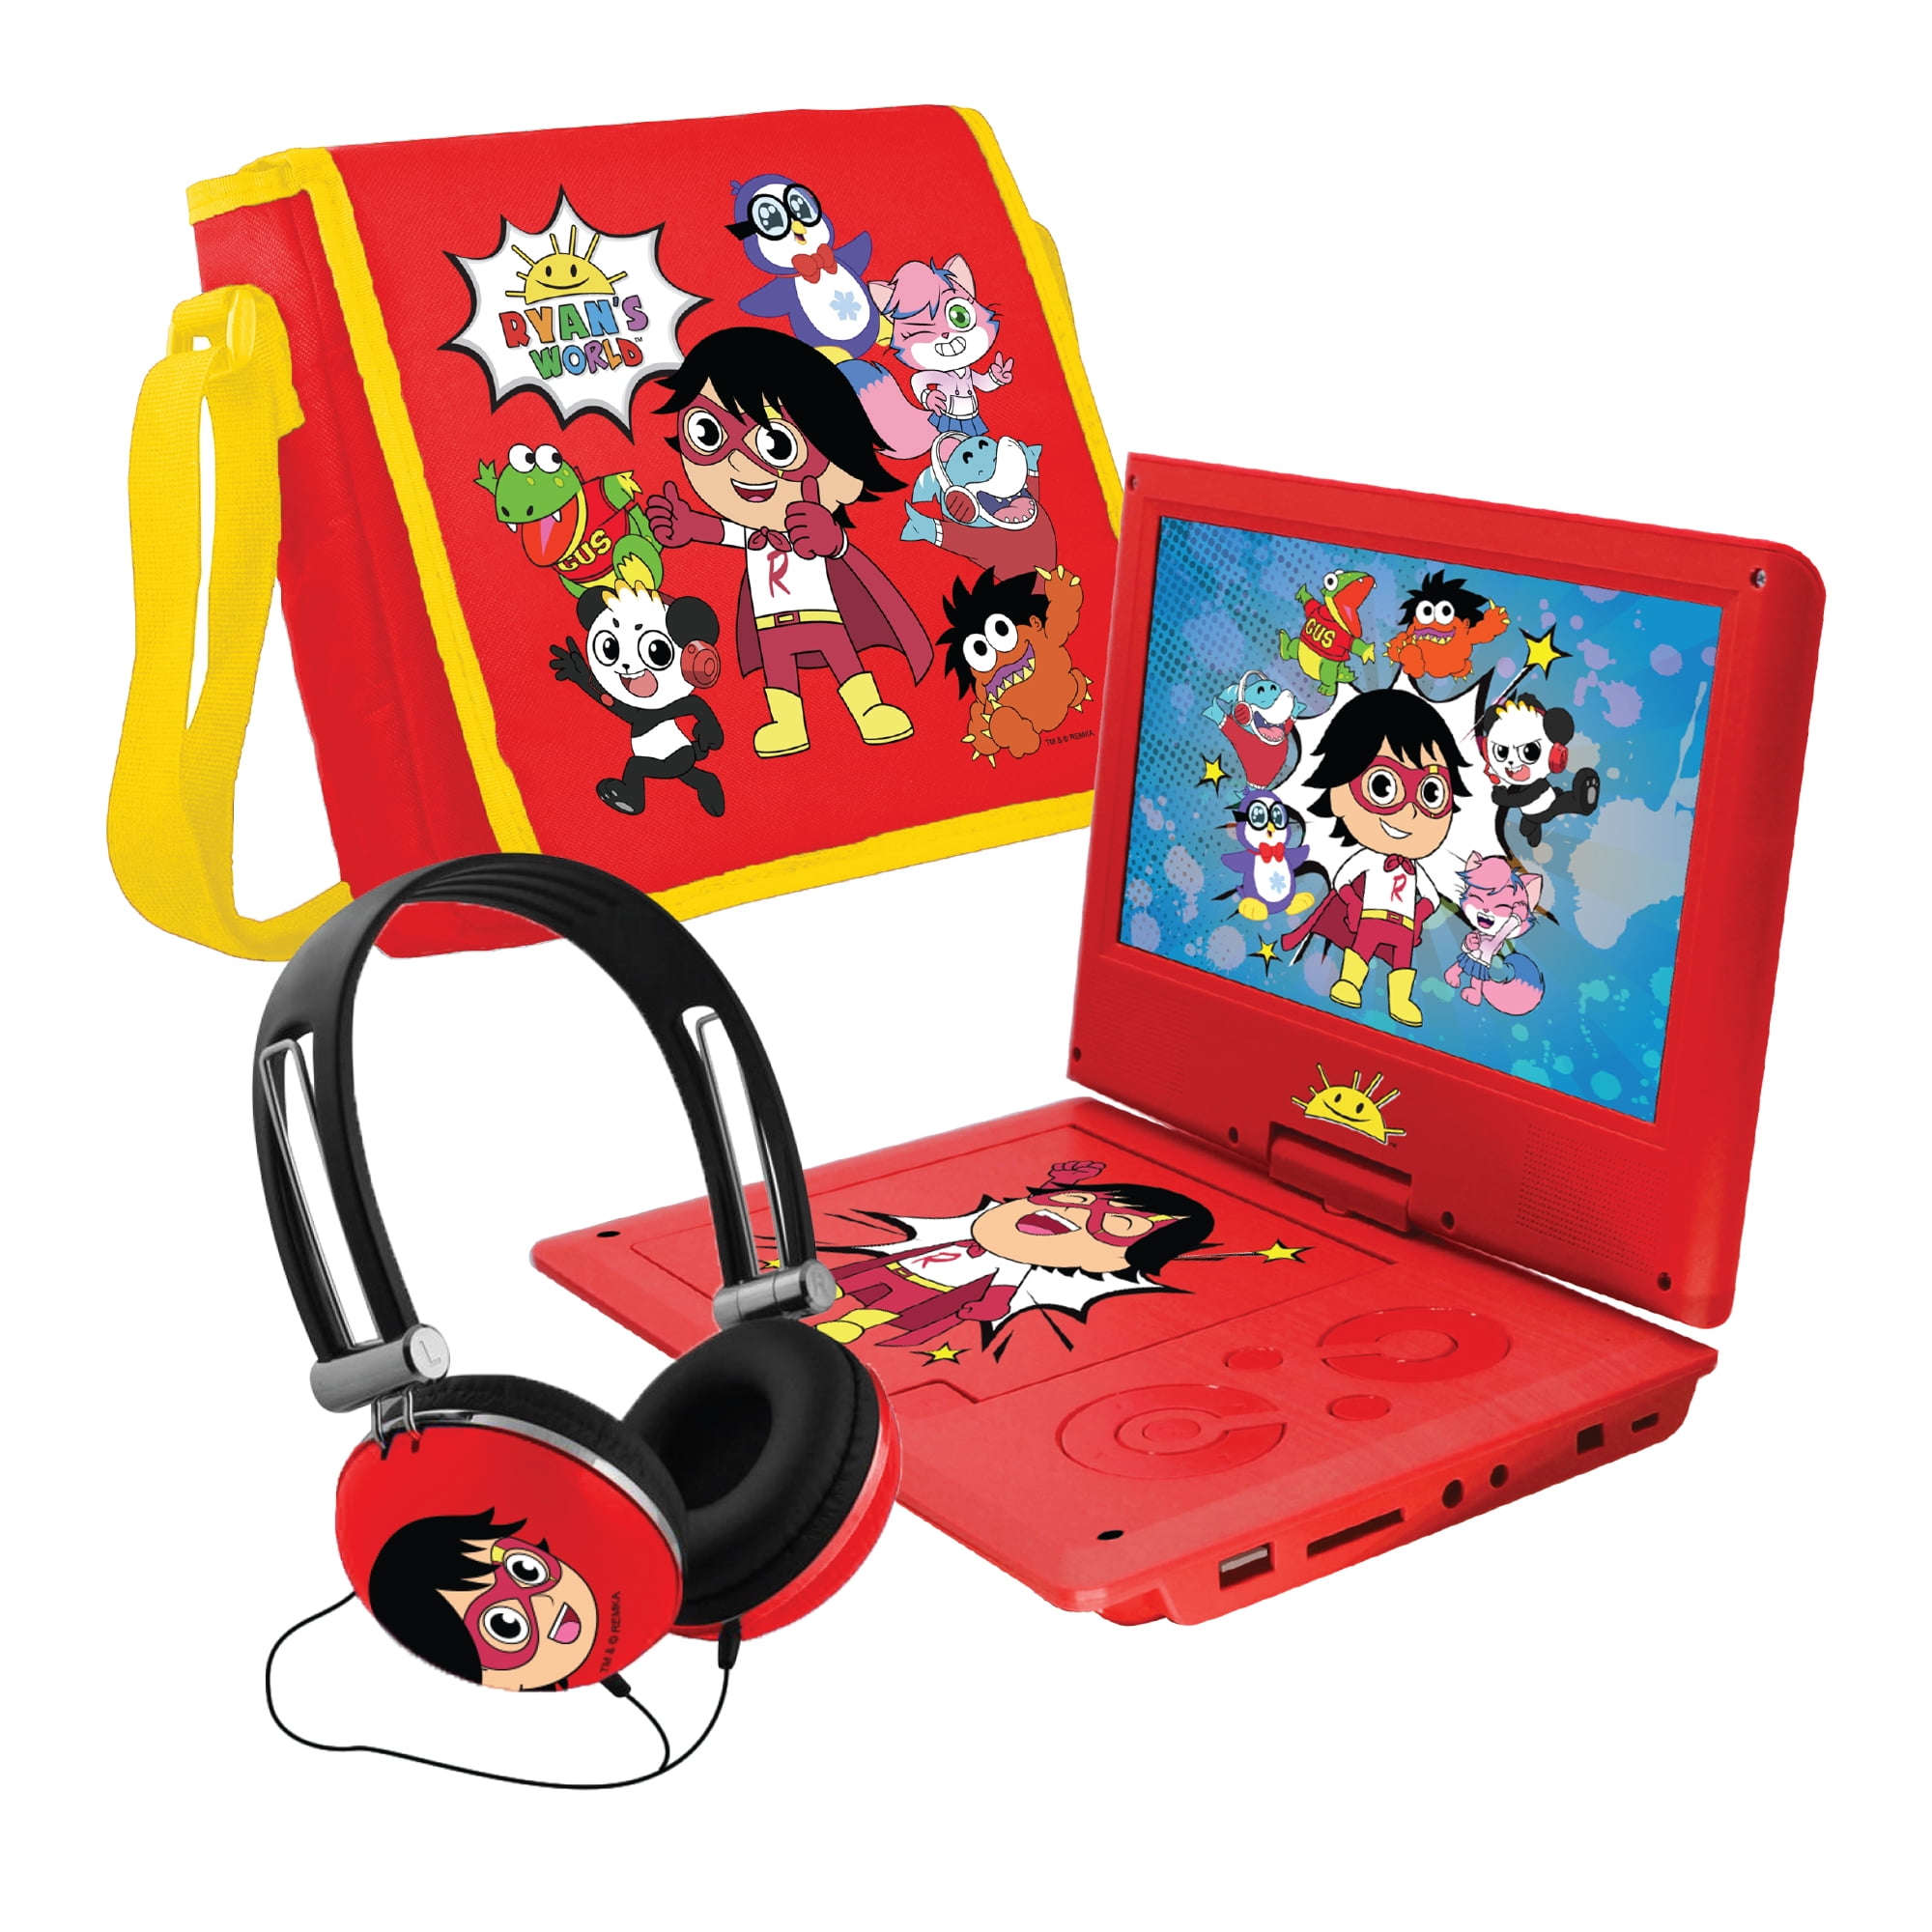 Ryan's World 9" Portable DVD Player with Matching Headphones and Case + Free Ryan and Friends DVD - Walmart.com